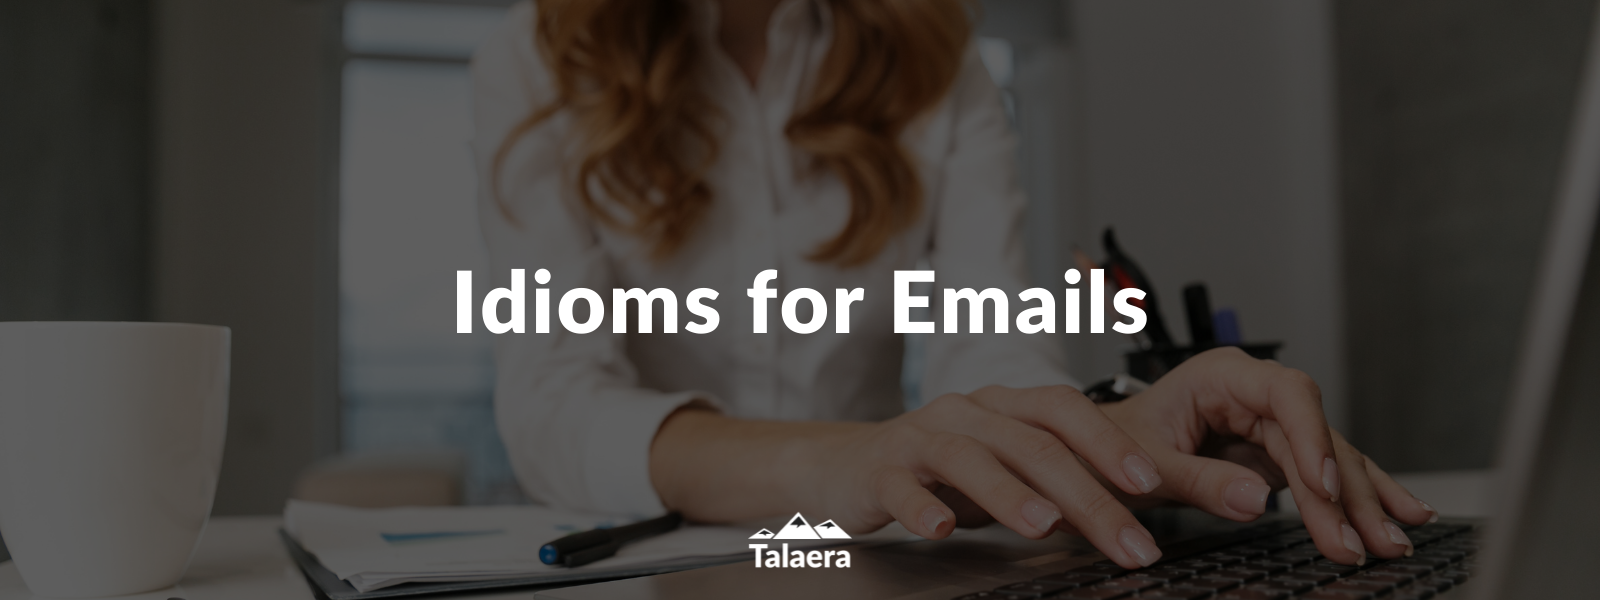 Idioms for Emails - Talaera Business English